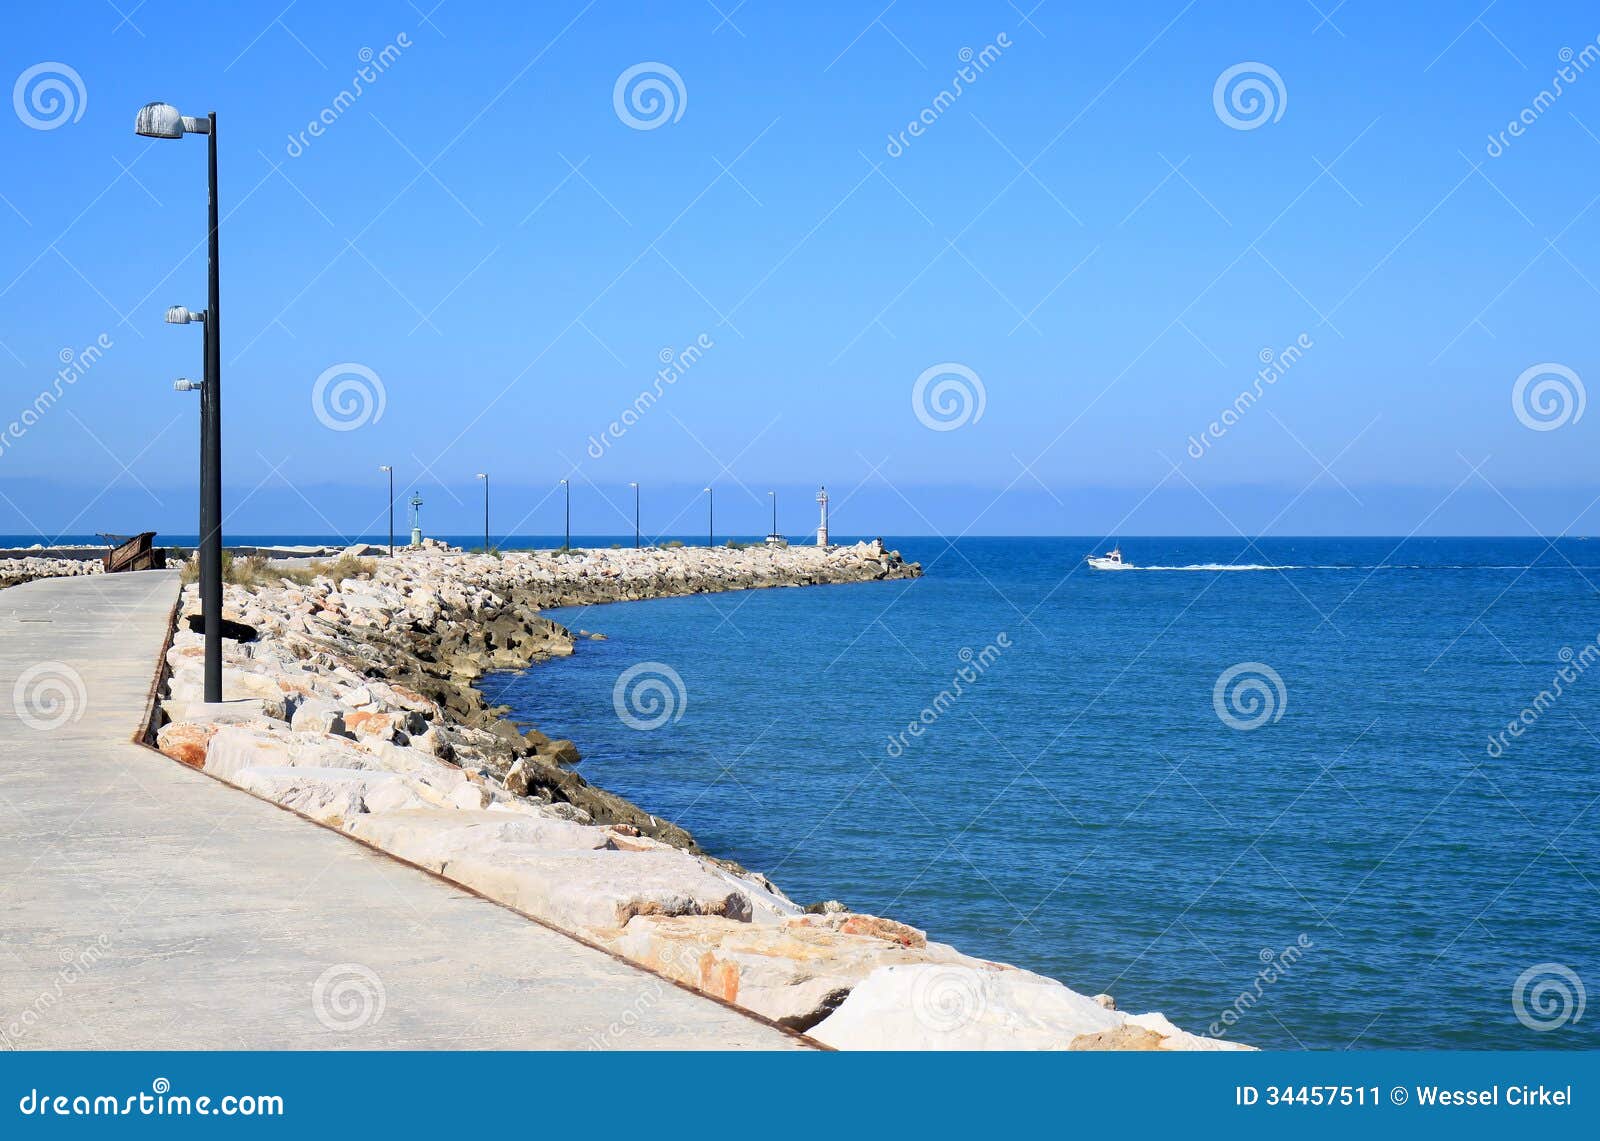 Fisherboat Comes Home, Capoiale, Italy Stock Image - Image ...